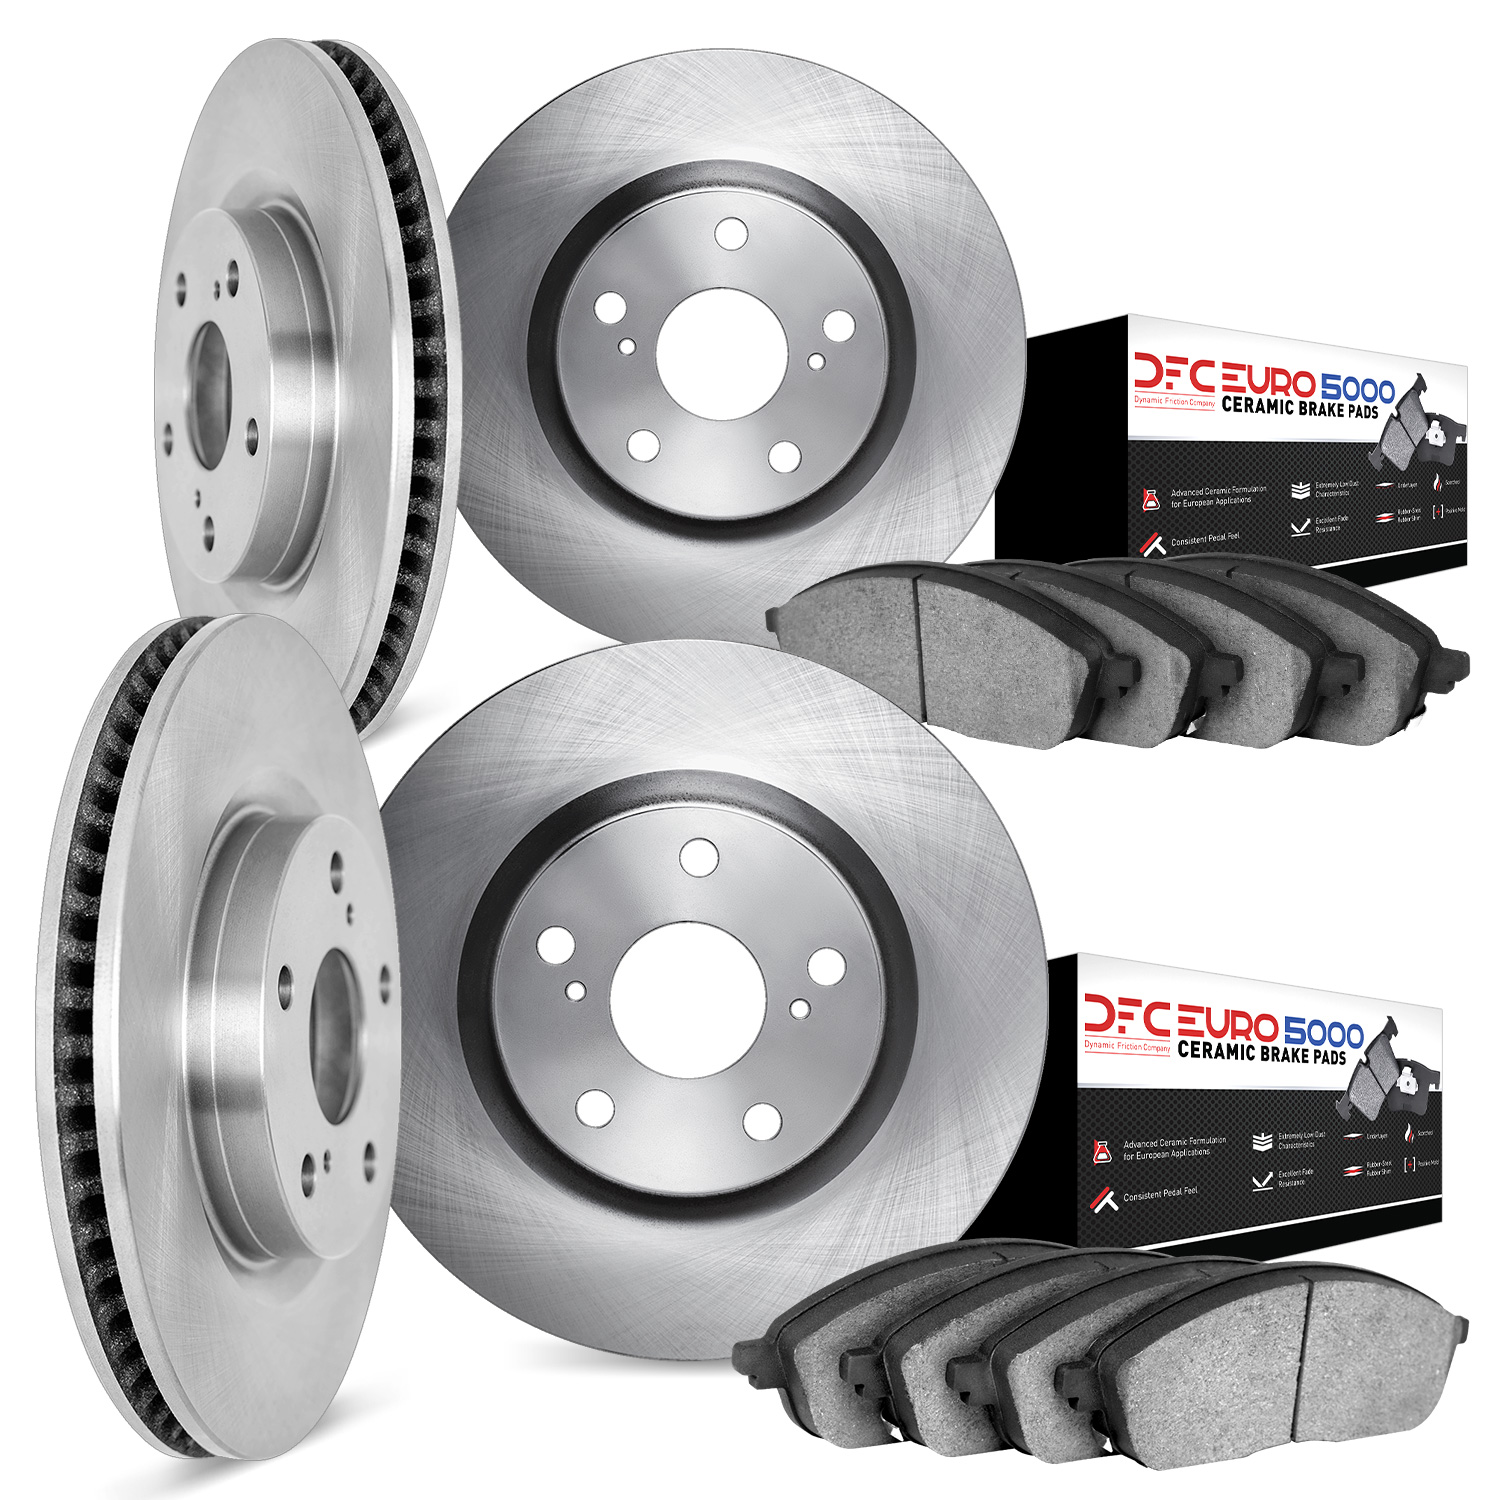 6604-31022 Brake Rotors w/5000 Euro Ceramic Brake Pads, 2007-2015 BMW, Position: Front and Rear